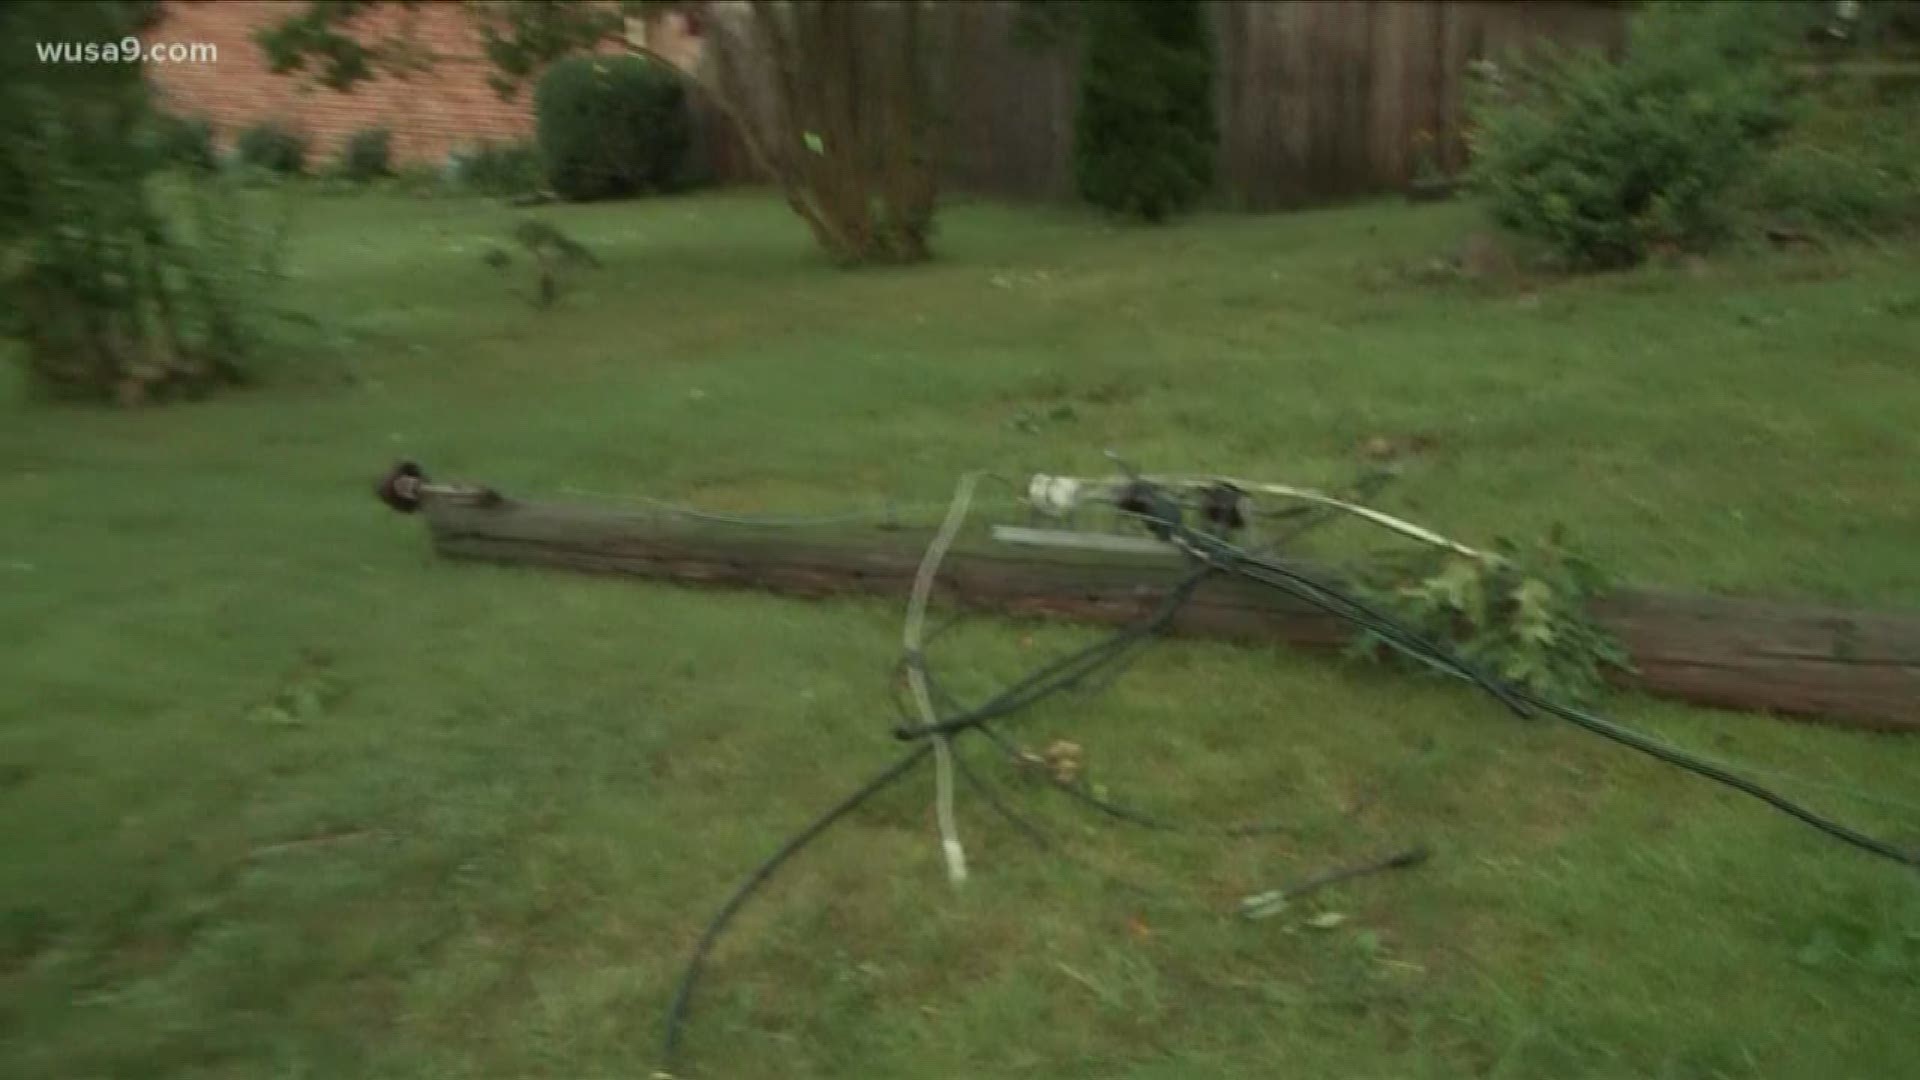 A power line pole in the a neighborhood in Montgomery County, Maryland after heavy storms.